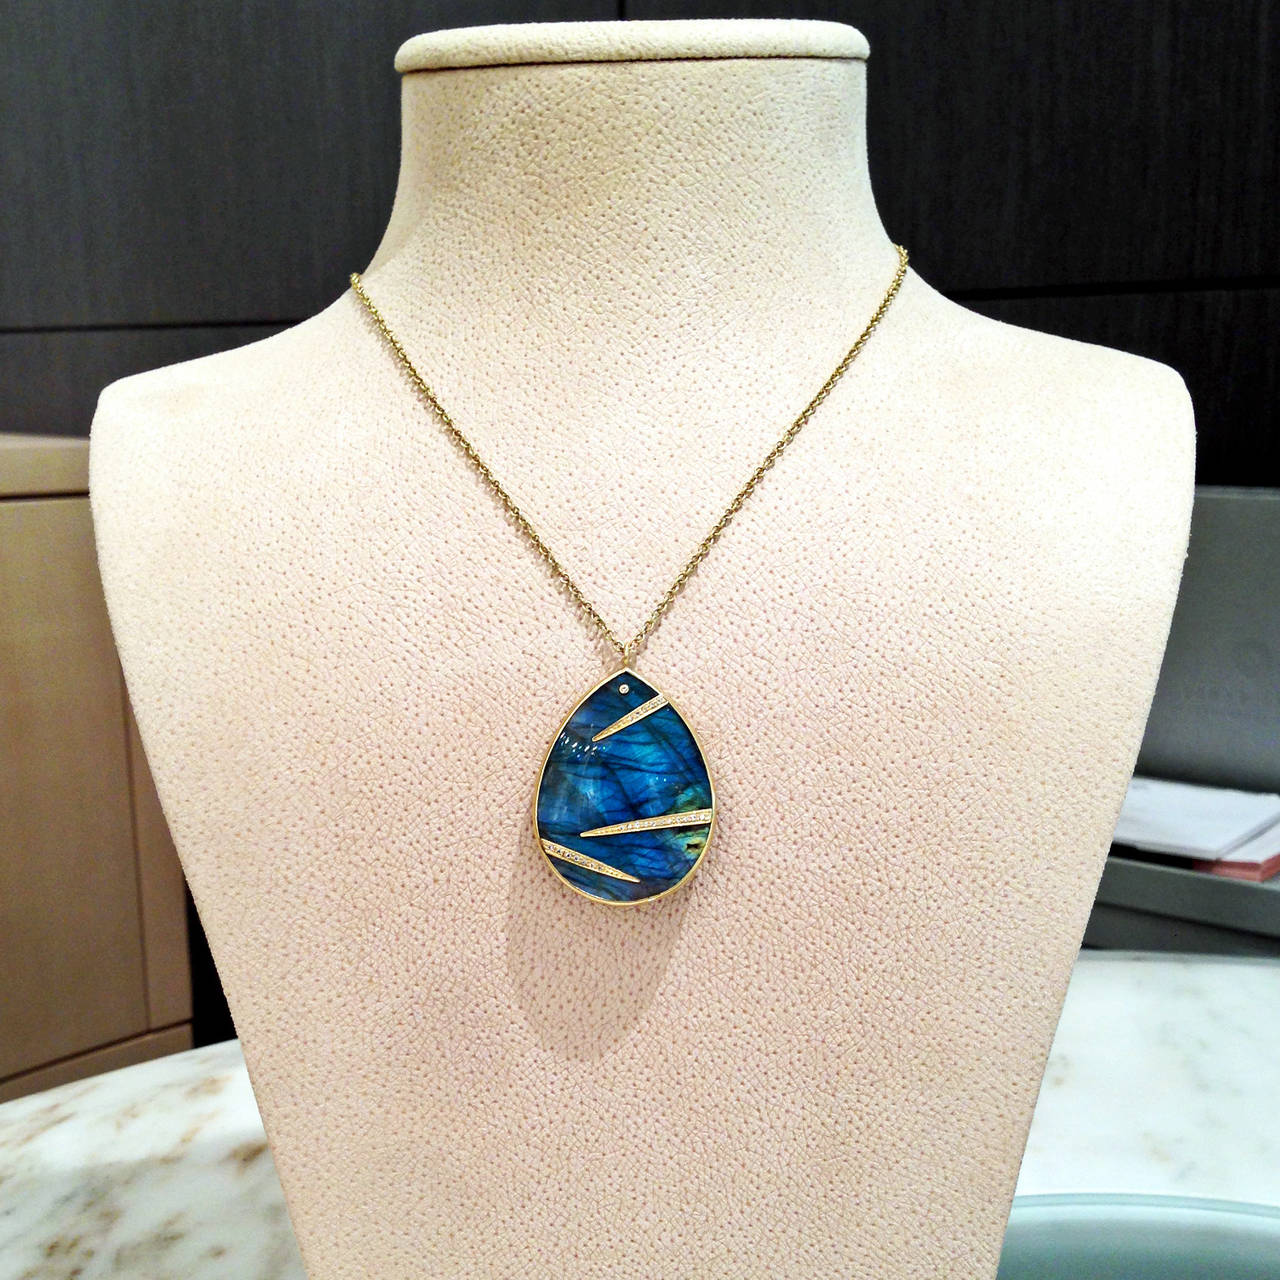 One-of-a-Kind Bamboo Necklace handcrafted in 18k yellow gold with a stunning, vibrant labradorite prong-set and bezel-set with white round brilliant-cut diamonds. Labradorite primarily blue with flashes of green, orange, yellow, and red. Can be worn